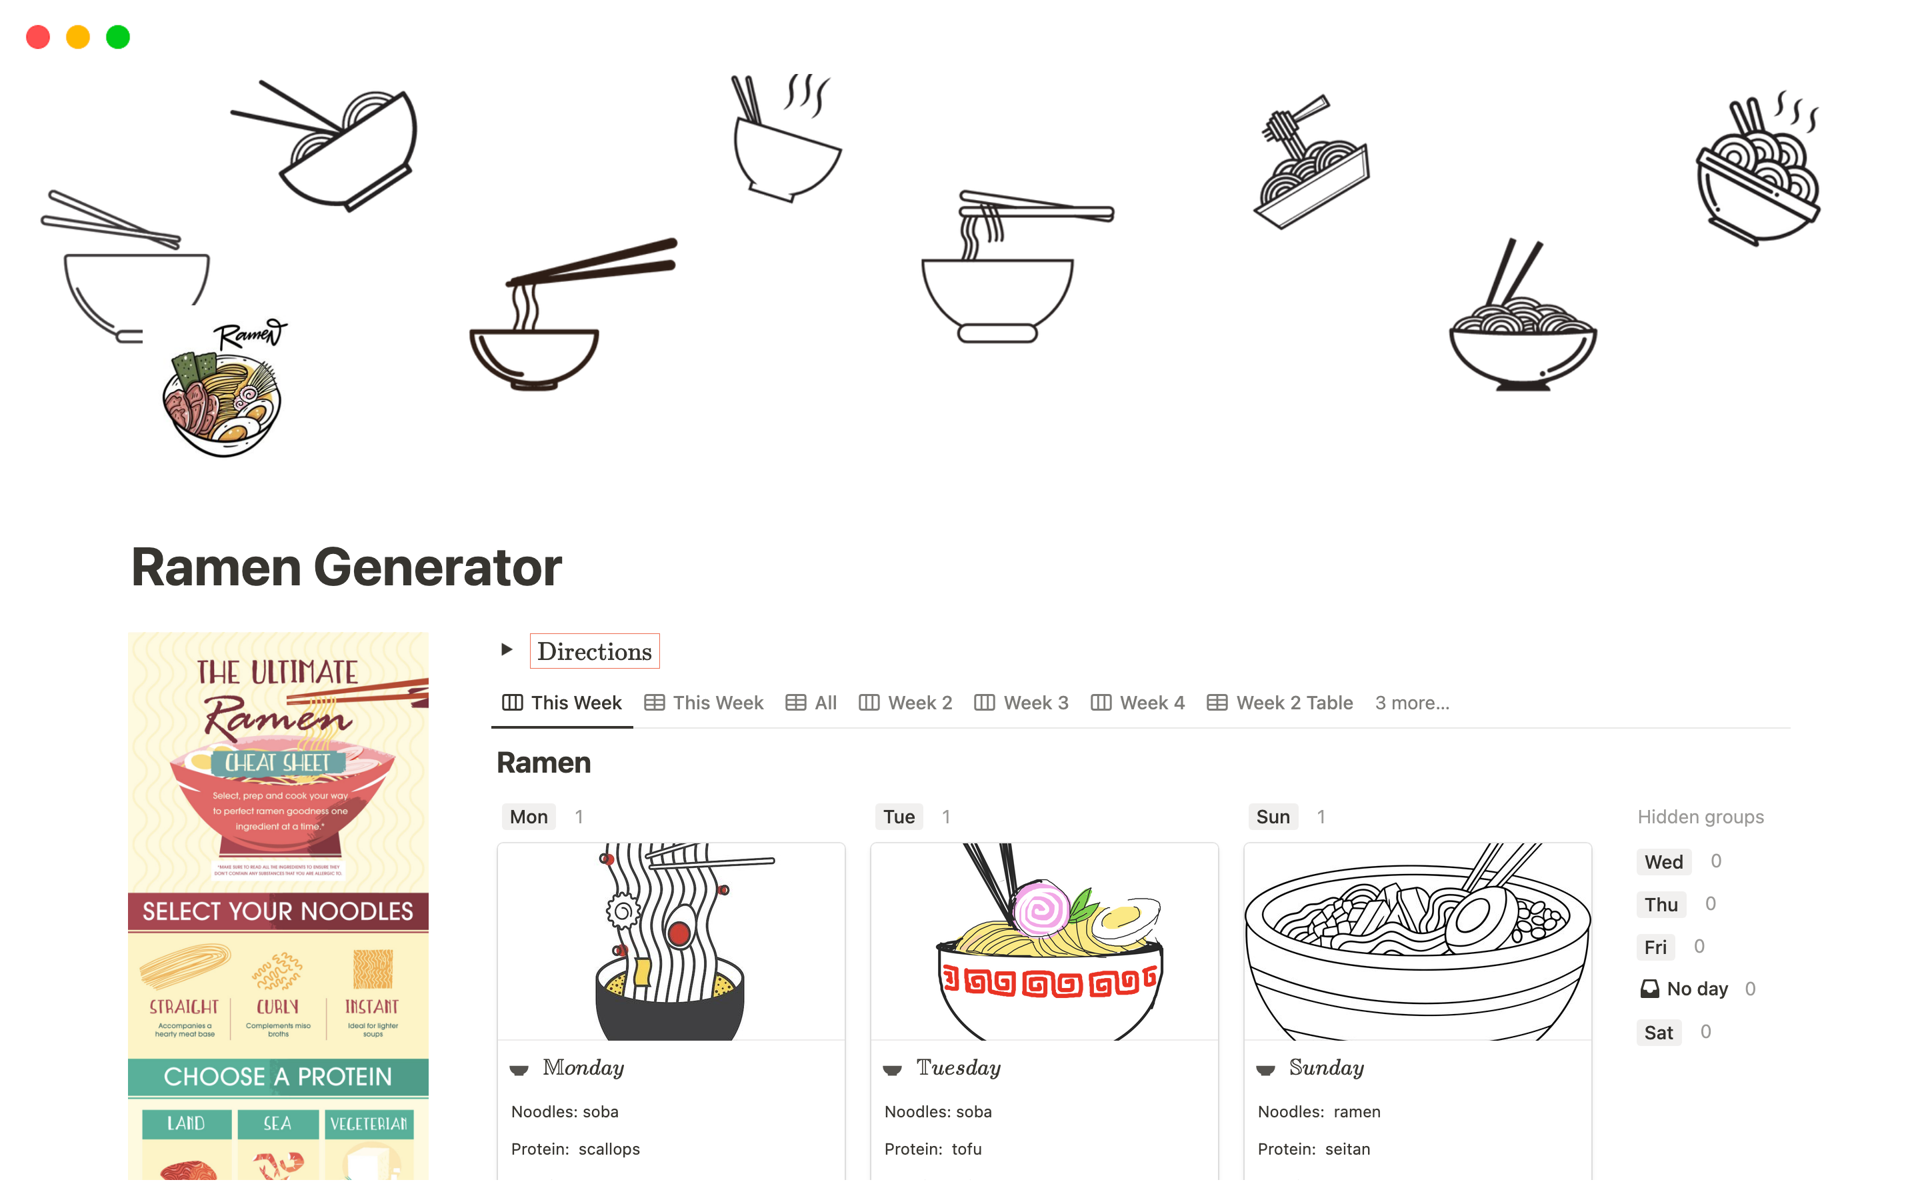 The Ramen Recipe Generator is a Notion Template that offers budget-friendly and customizable meal options using Ramen noodles as the main ingredient, perfect for saving money while enjoying delicious and diverse meals.